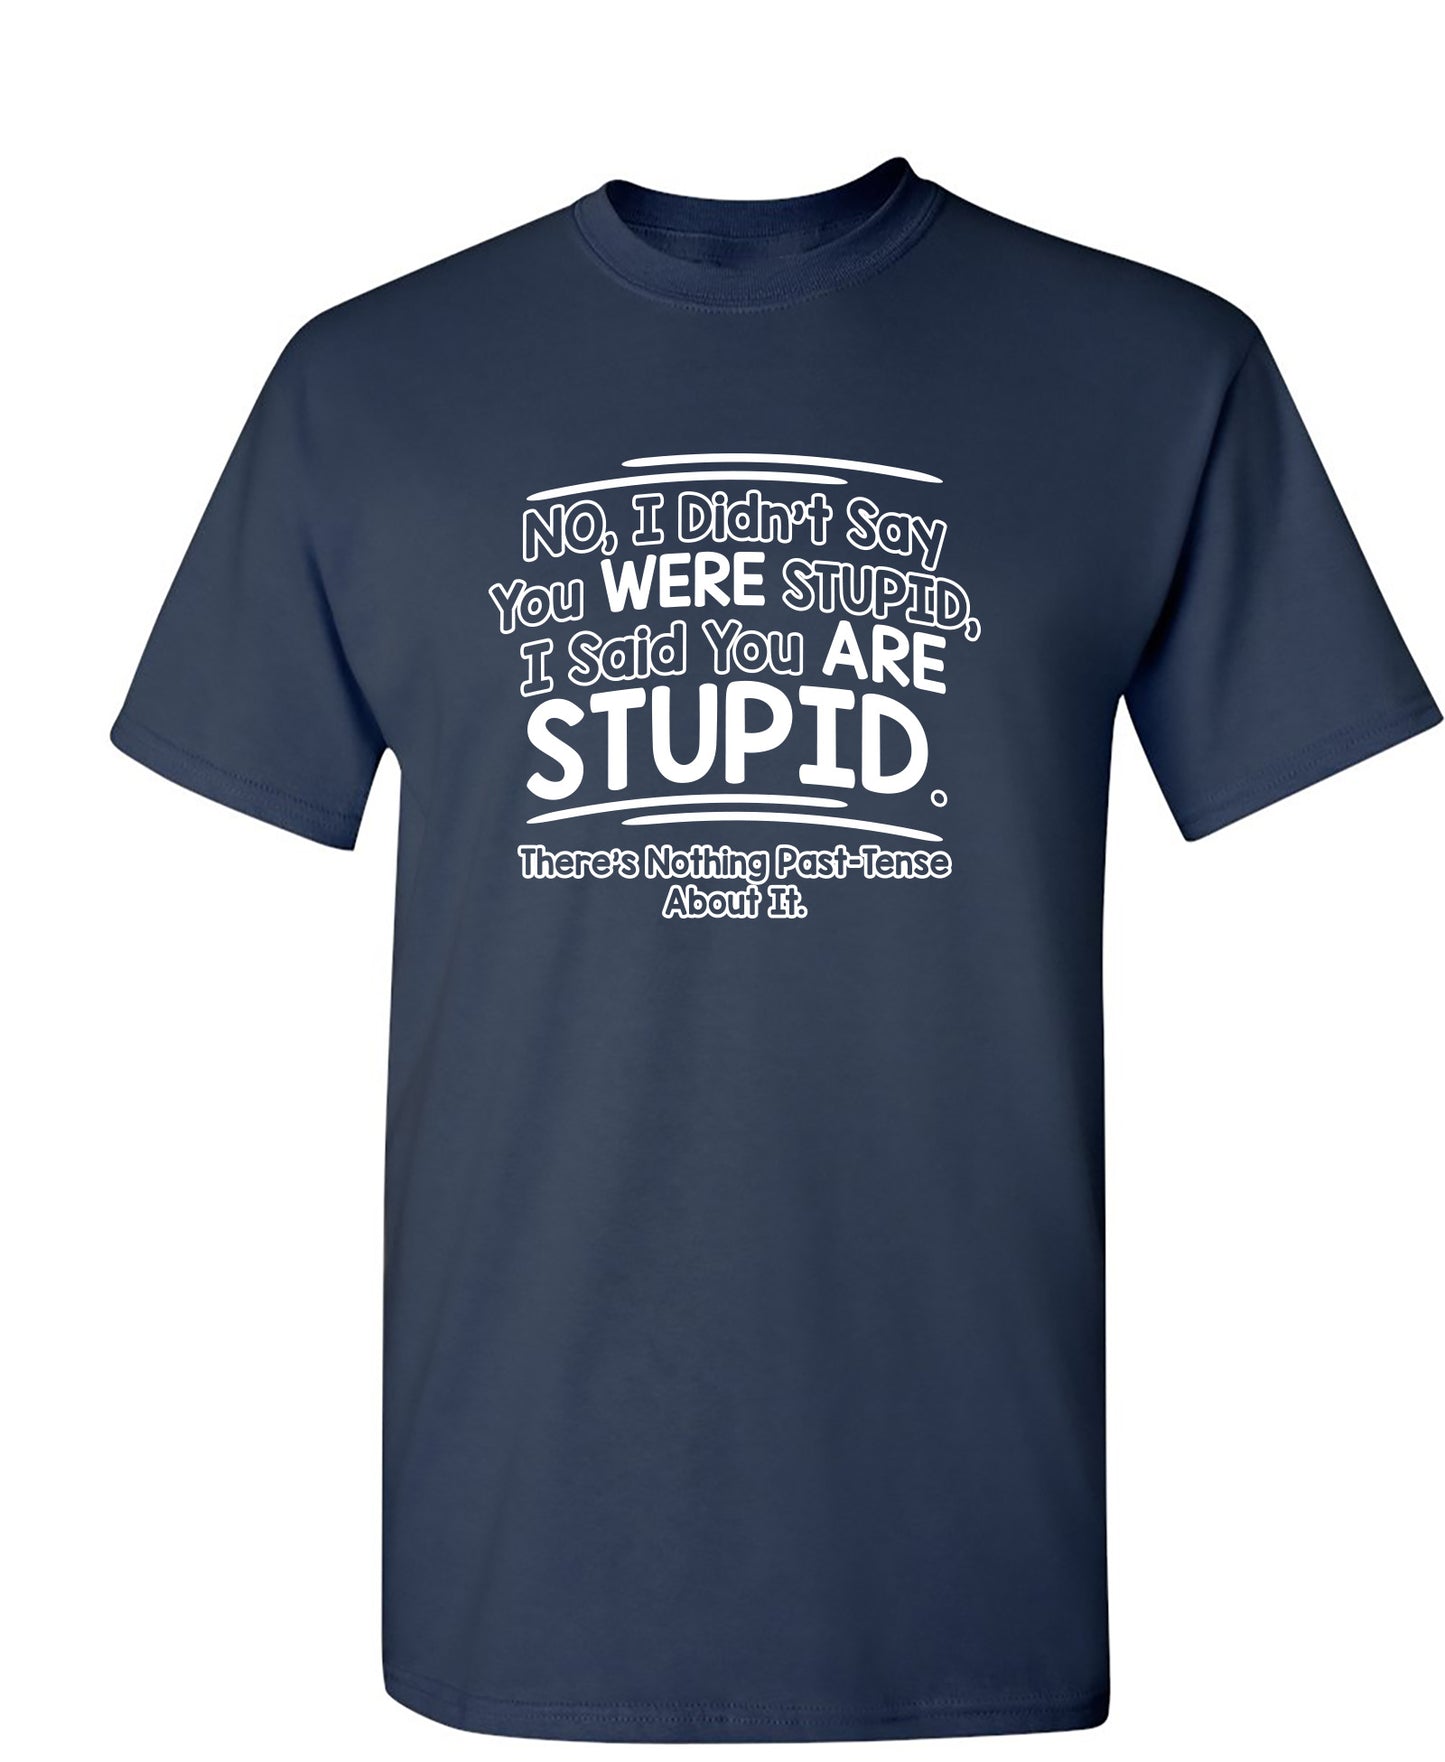 I Didn't Say You Were Stupid, I Said You Are Stupid - Funny T Shirts & Graphic Tees